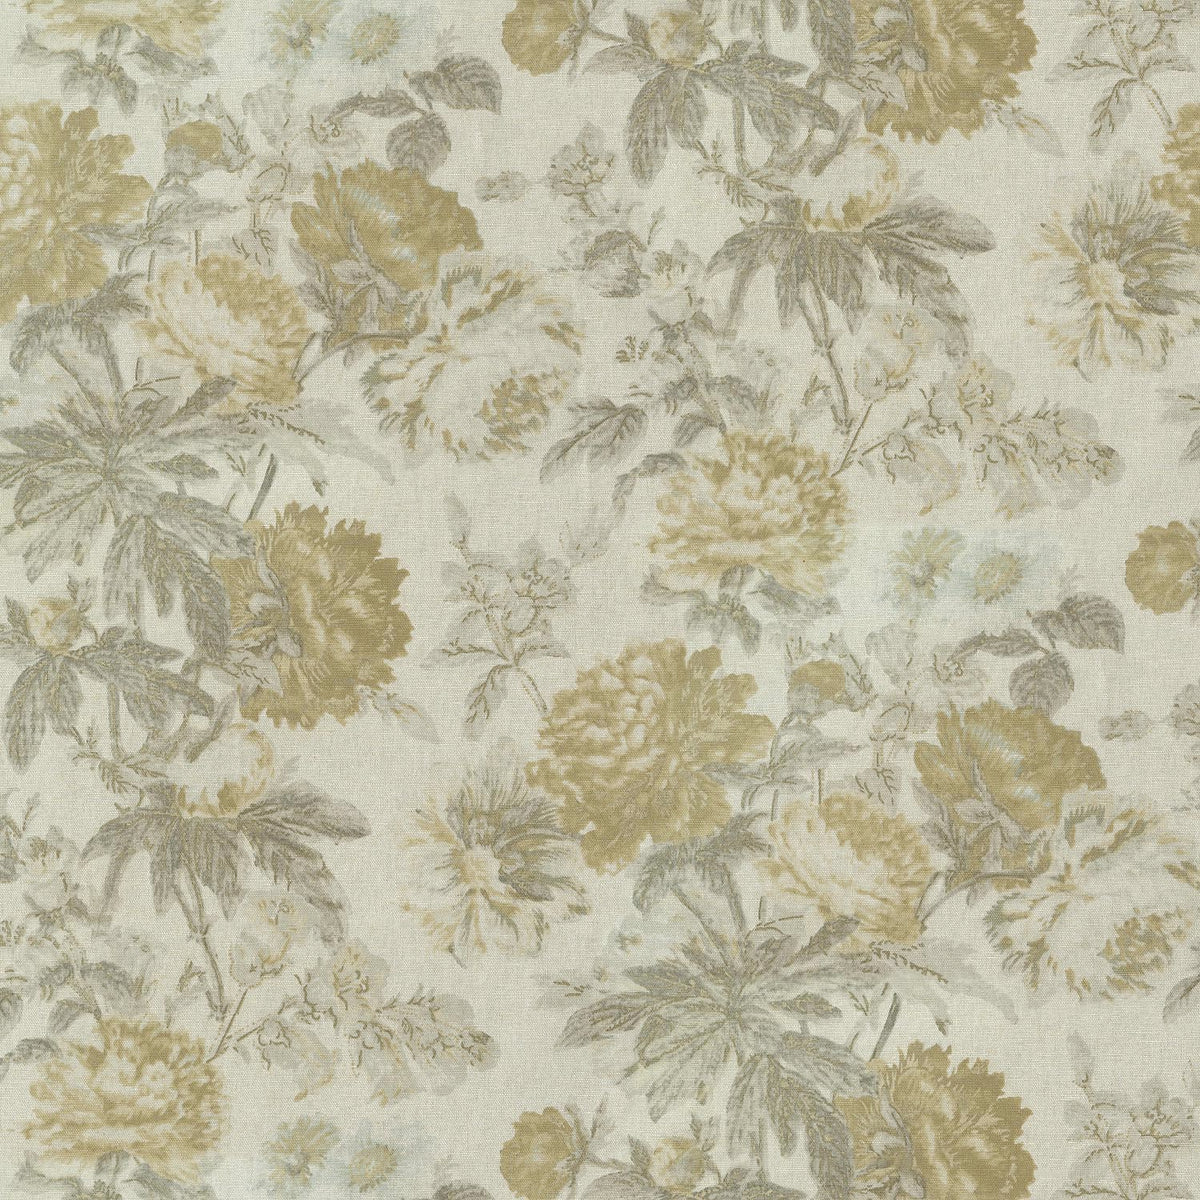 Waverly Daphne - Froth 682192 Upholstery Fabric